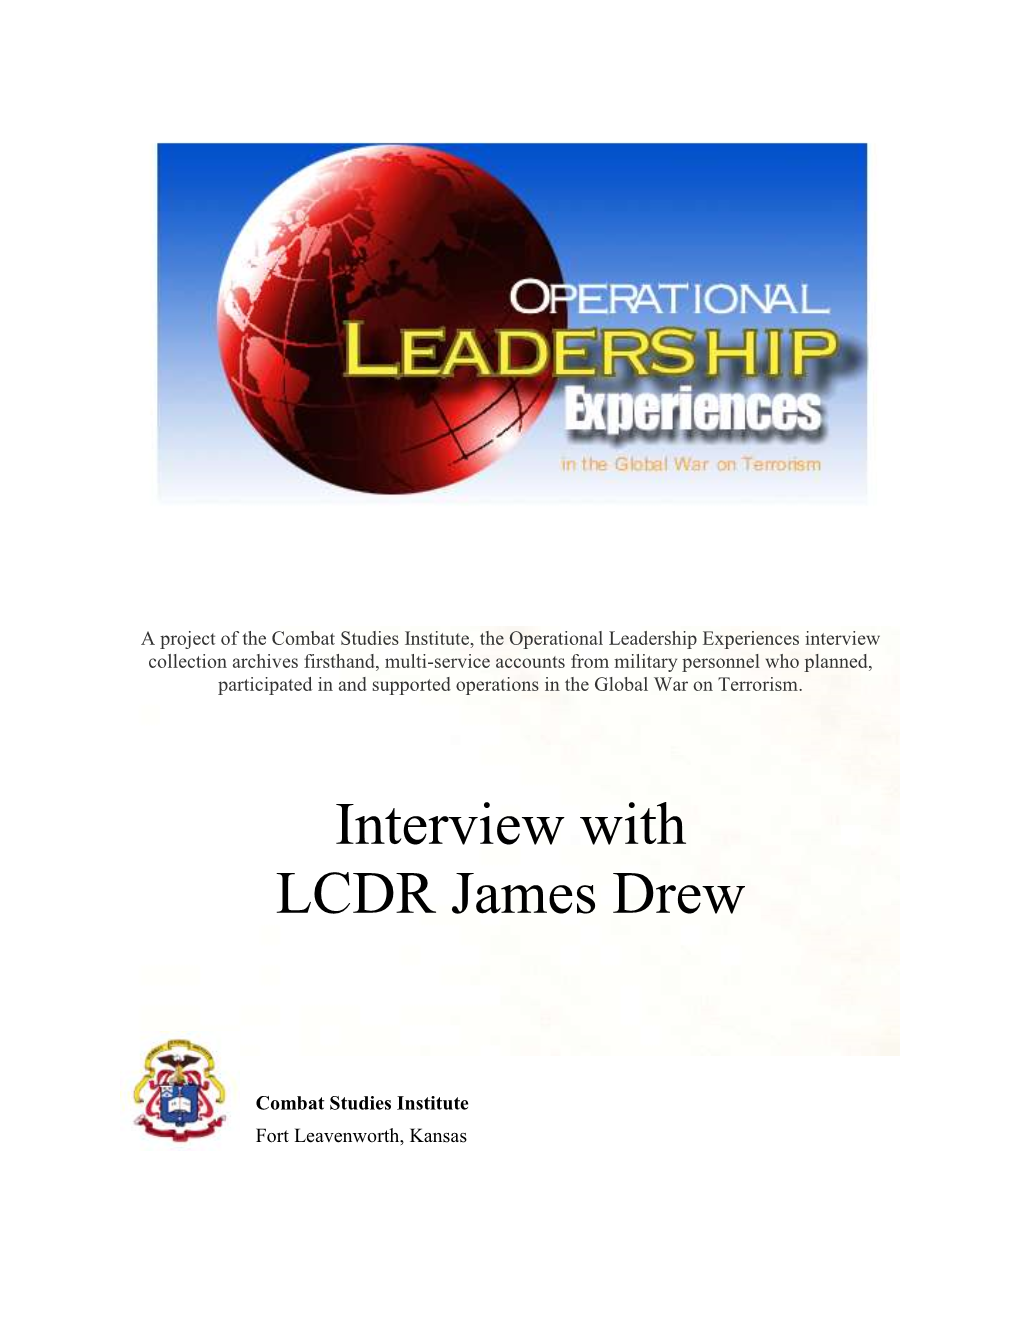 Interview with LCDR James Drew